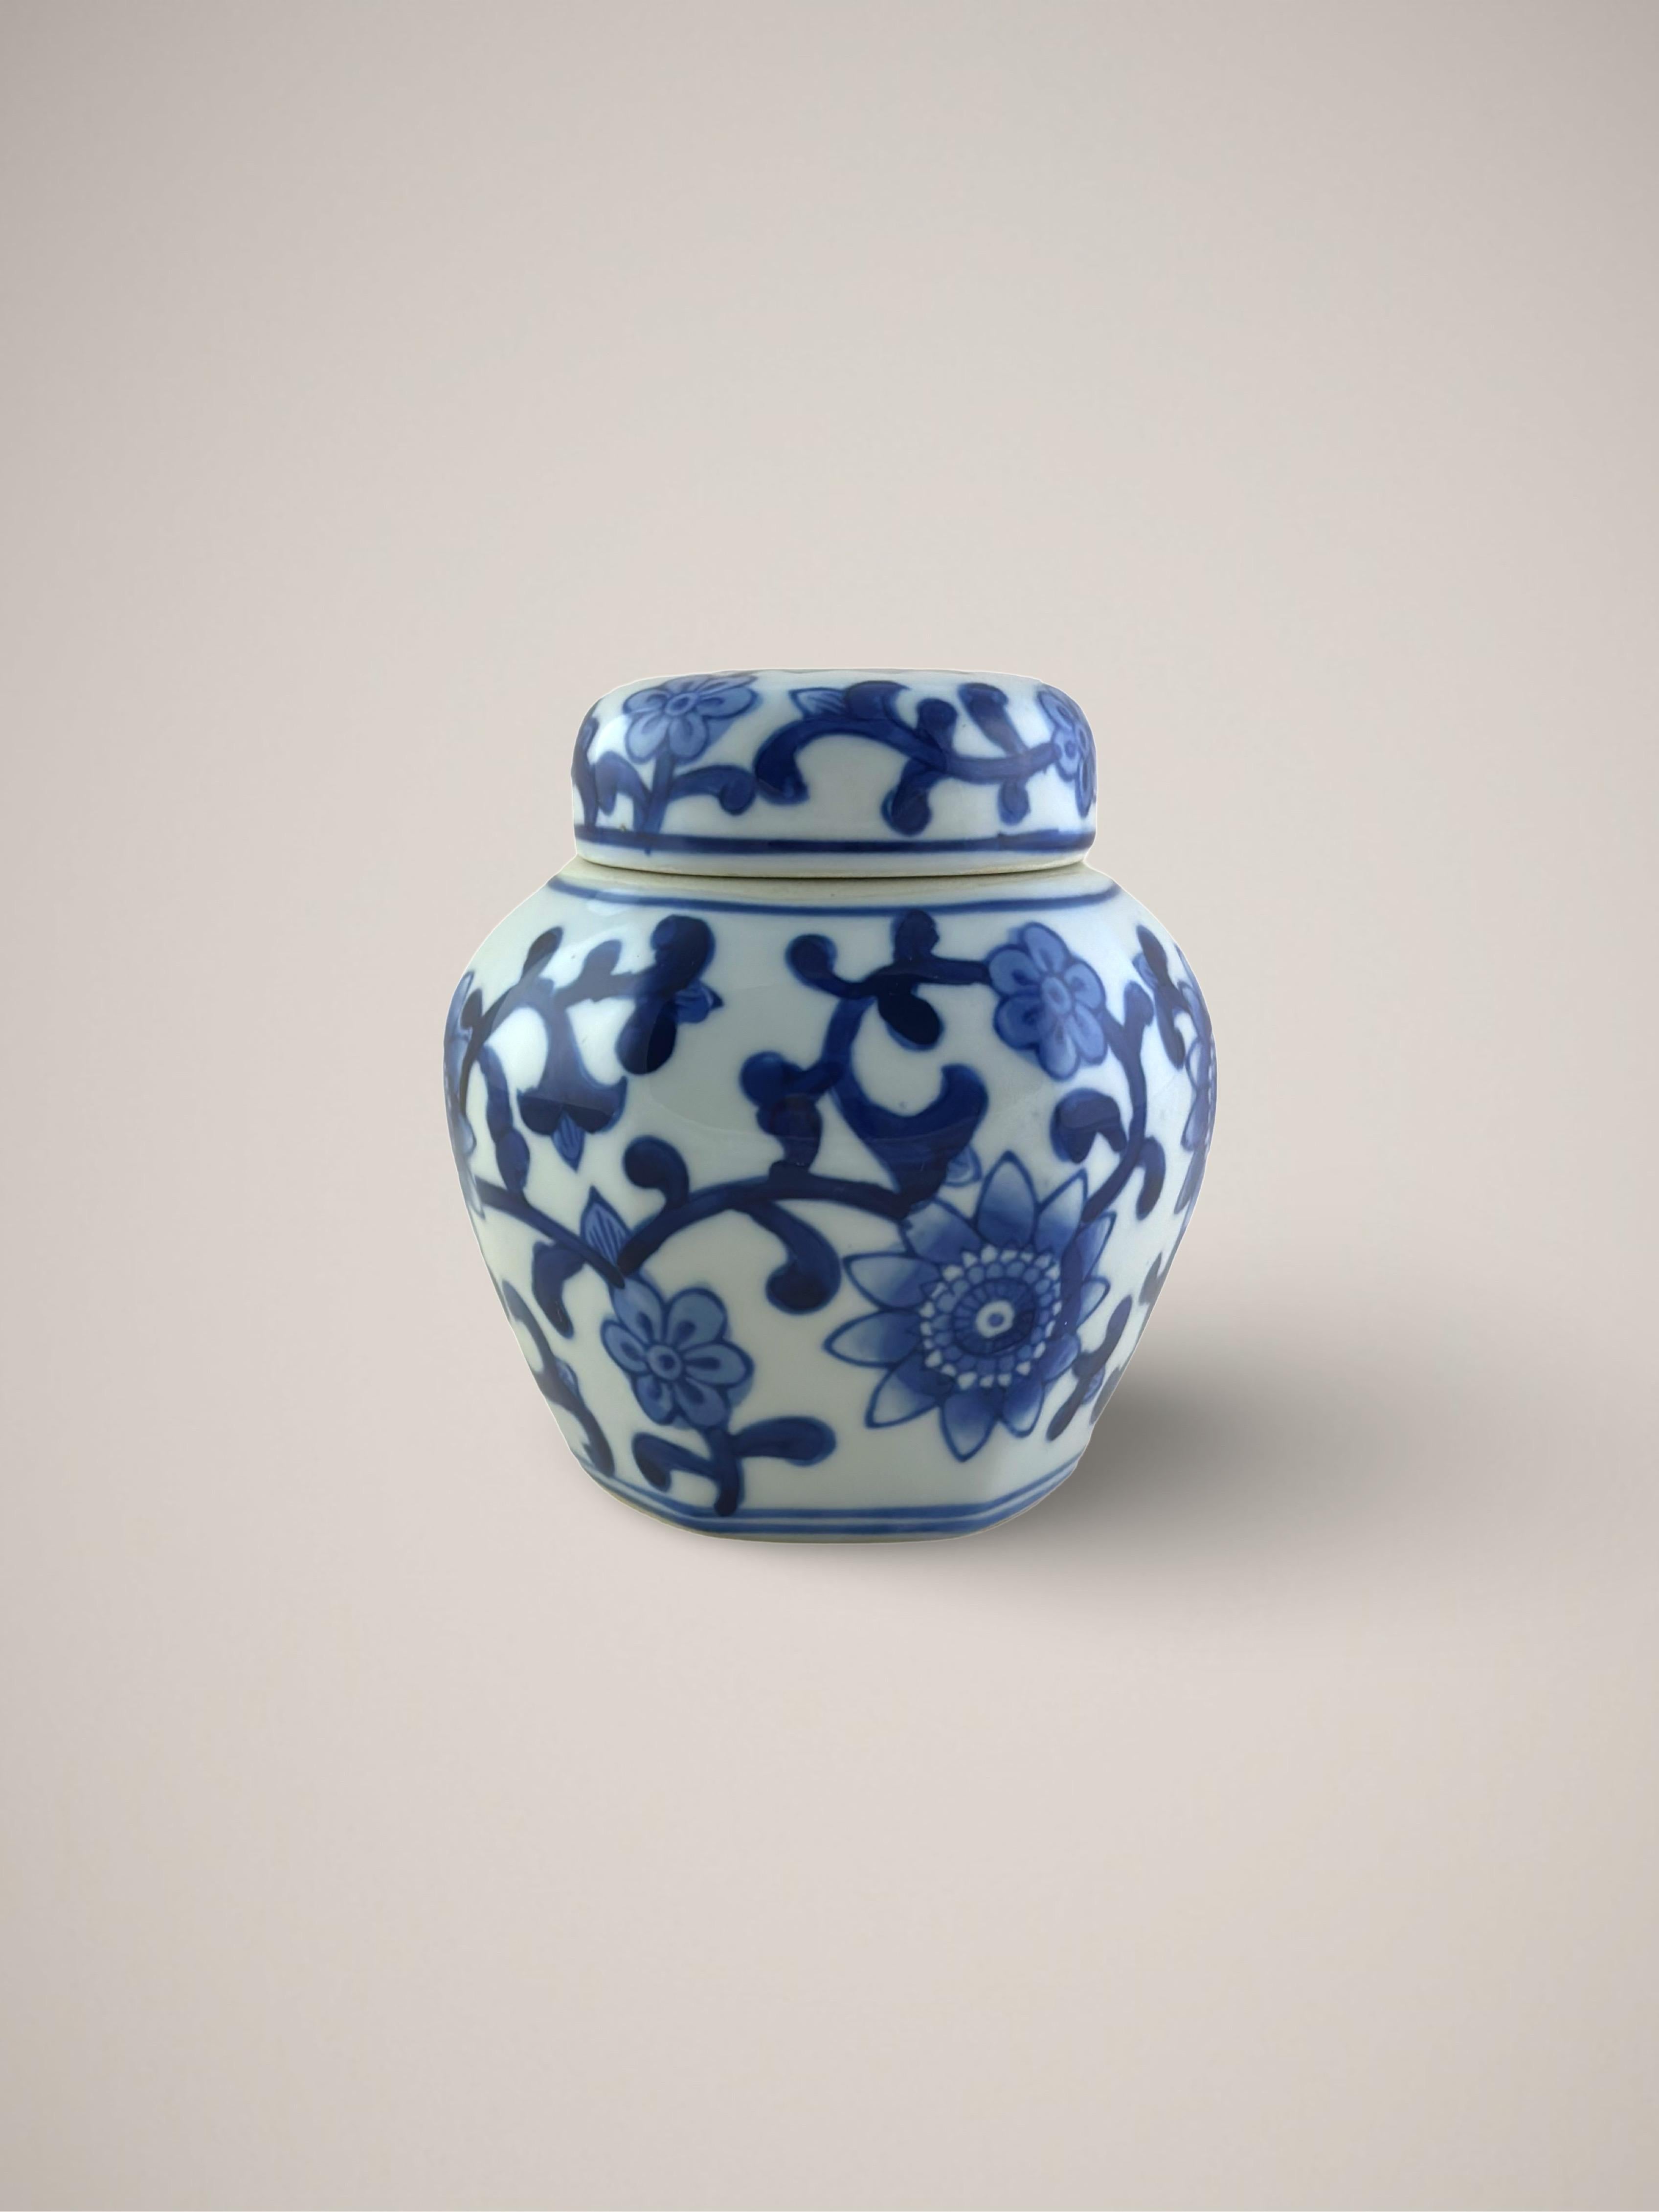 A vintage blue and white 'Ming Style' ginger jar, crafted in China during the latter half of the 20th century.

A smooth hexagonal-shaped body showcases the revered technique of Chinese blue underglazed porcelain. Its subtle underglazed base is